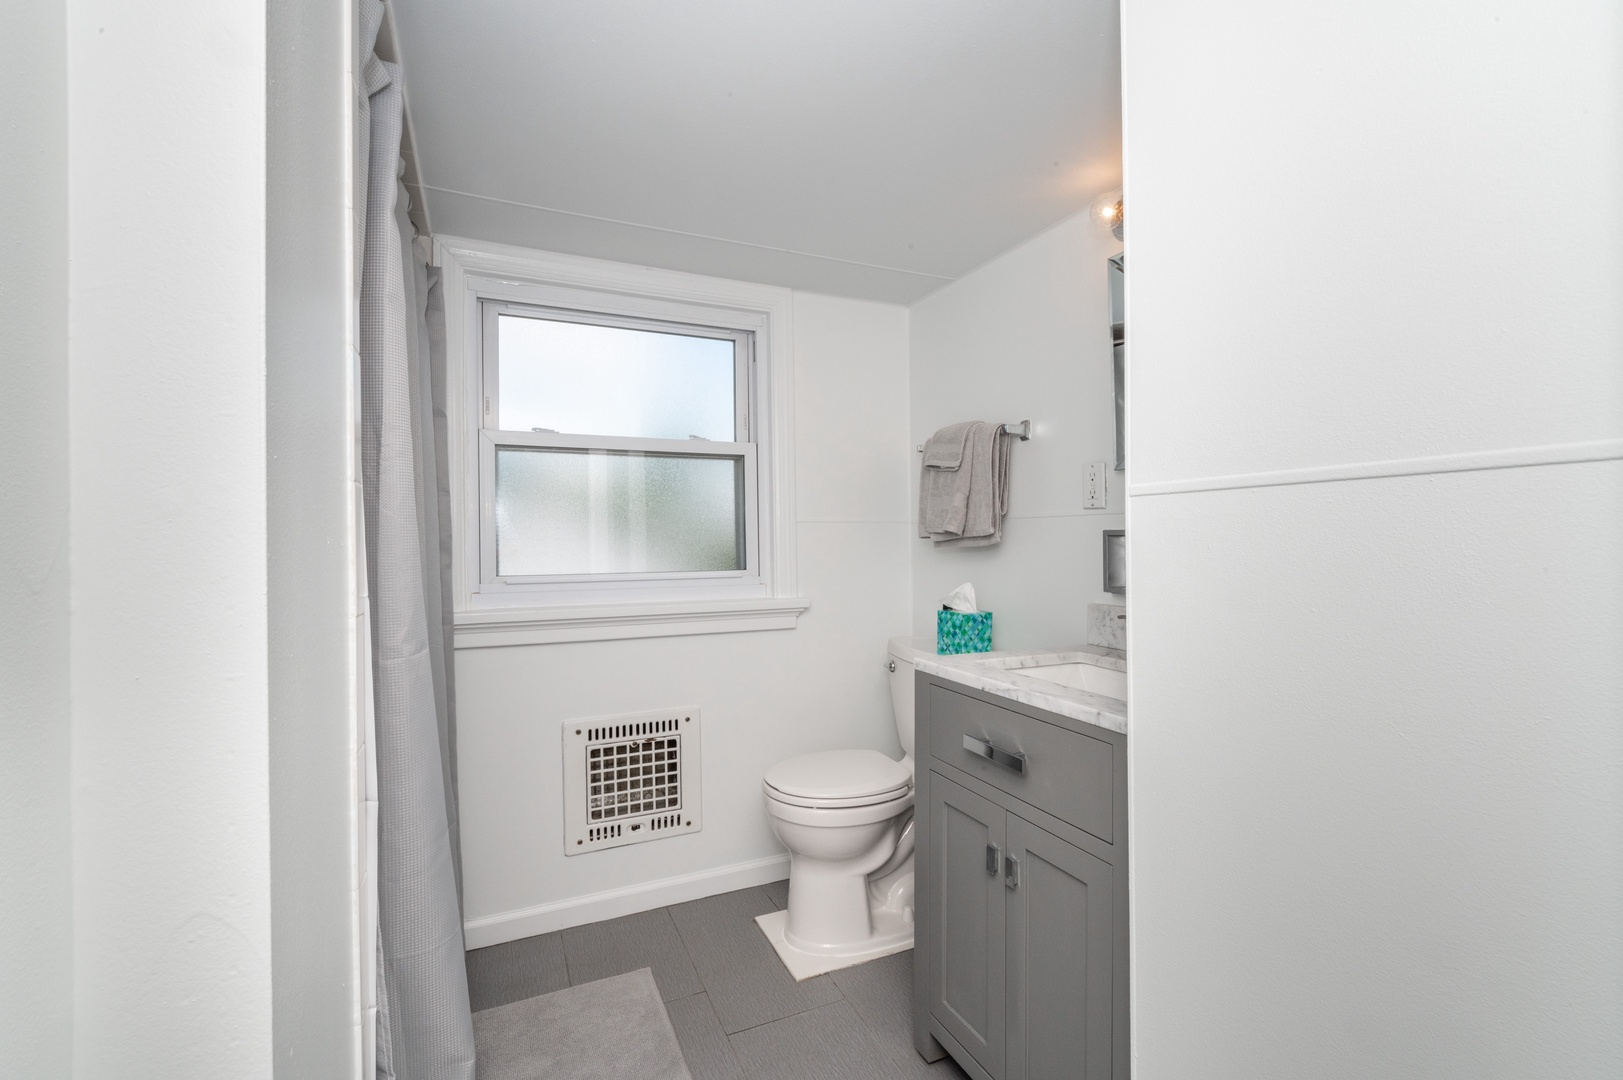 A full bath on the 3rd level offers a single vanity & walk-in shower